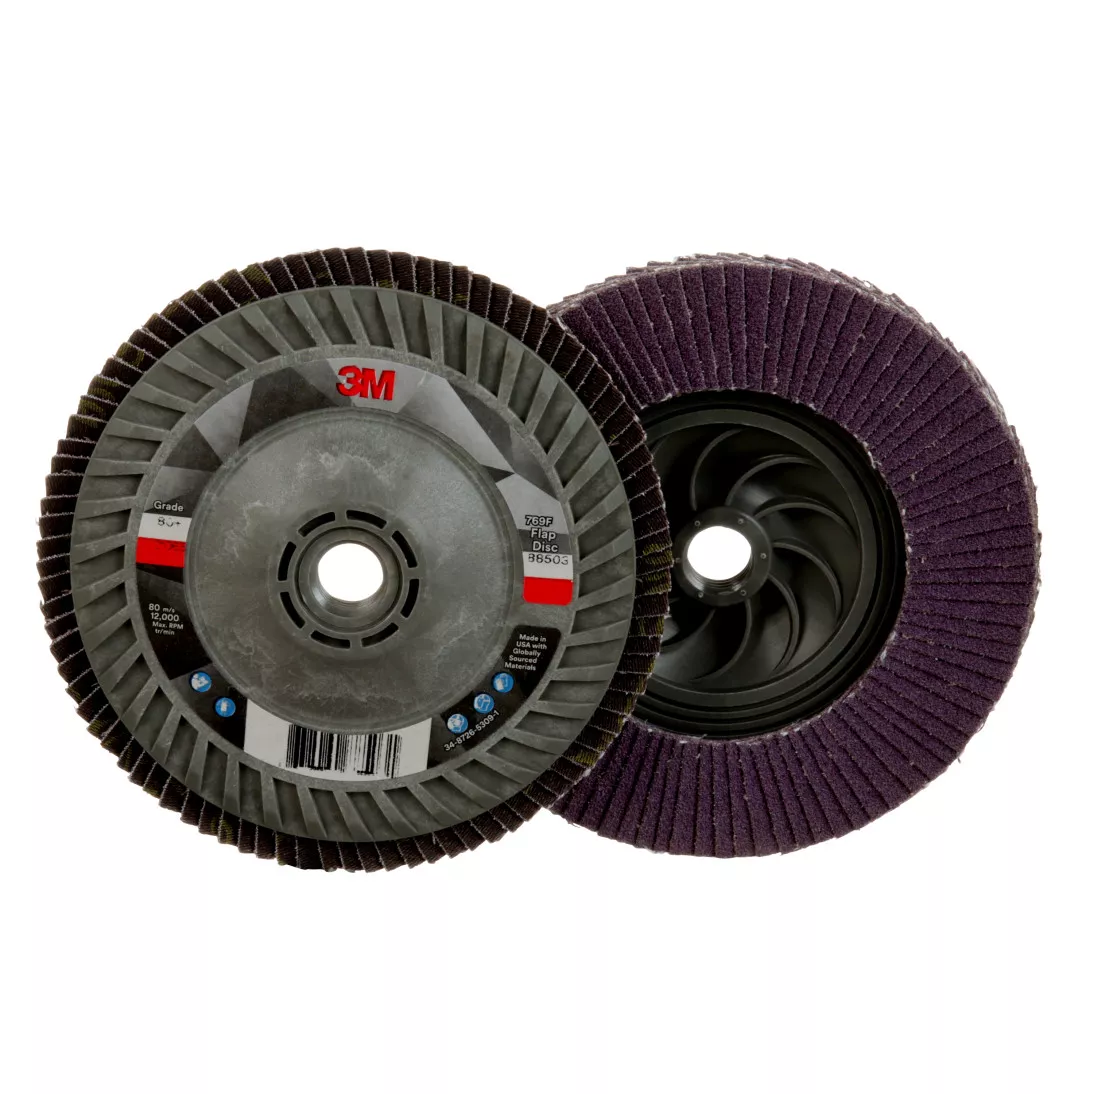 3M™ Flap Disc 769F, 80+, Quick Change, Type 27, 5 in x 5/8 in-11, 10
ea/Case